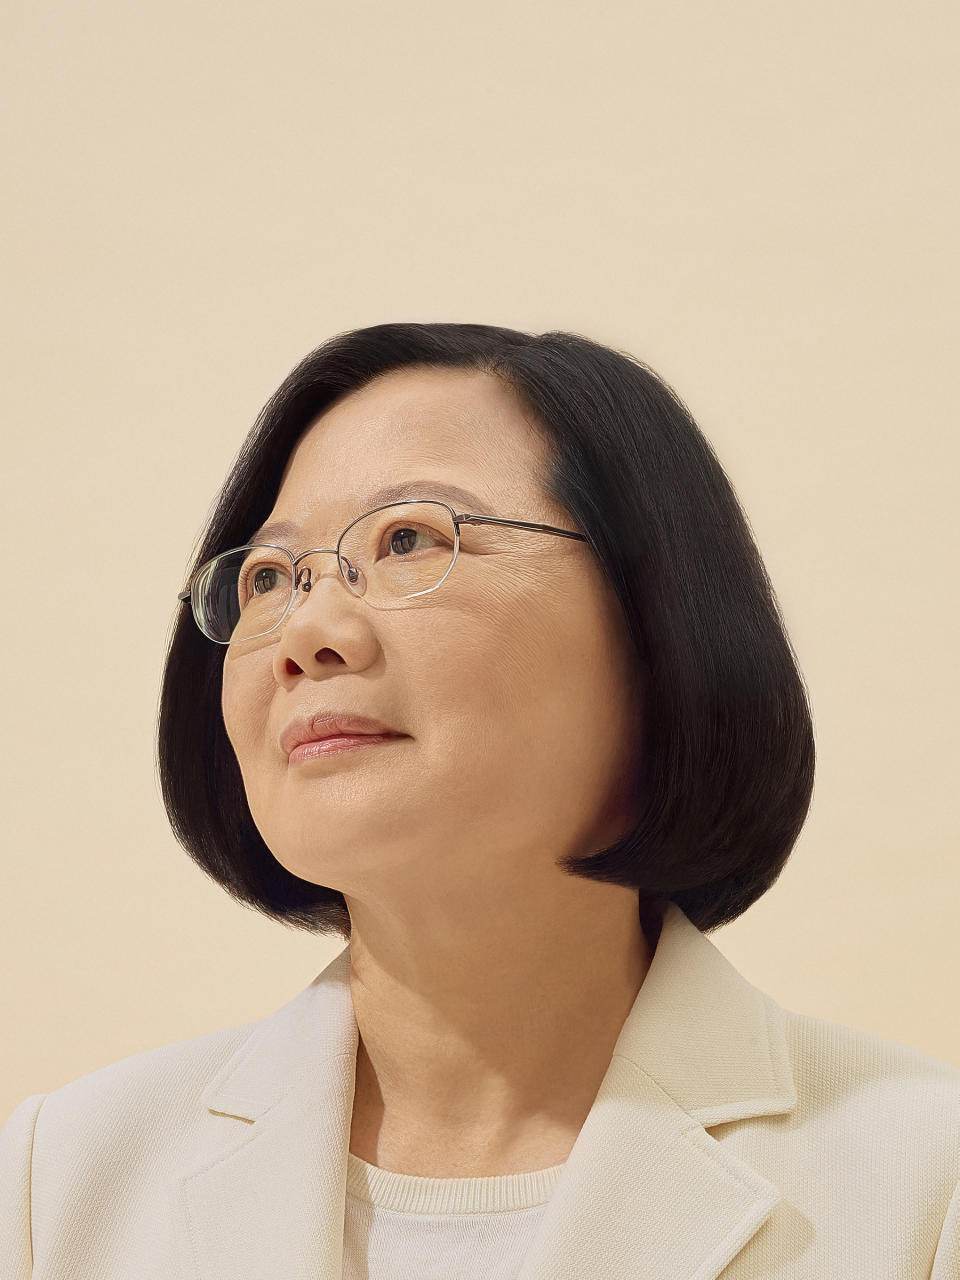 President Tsai, photographed in her Taipei office on Oct. 6. | Nhu Xuan Hua for TIME